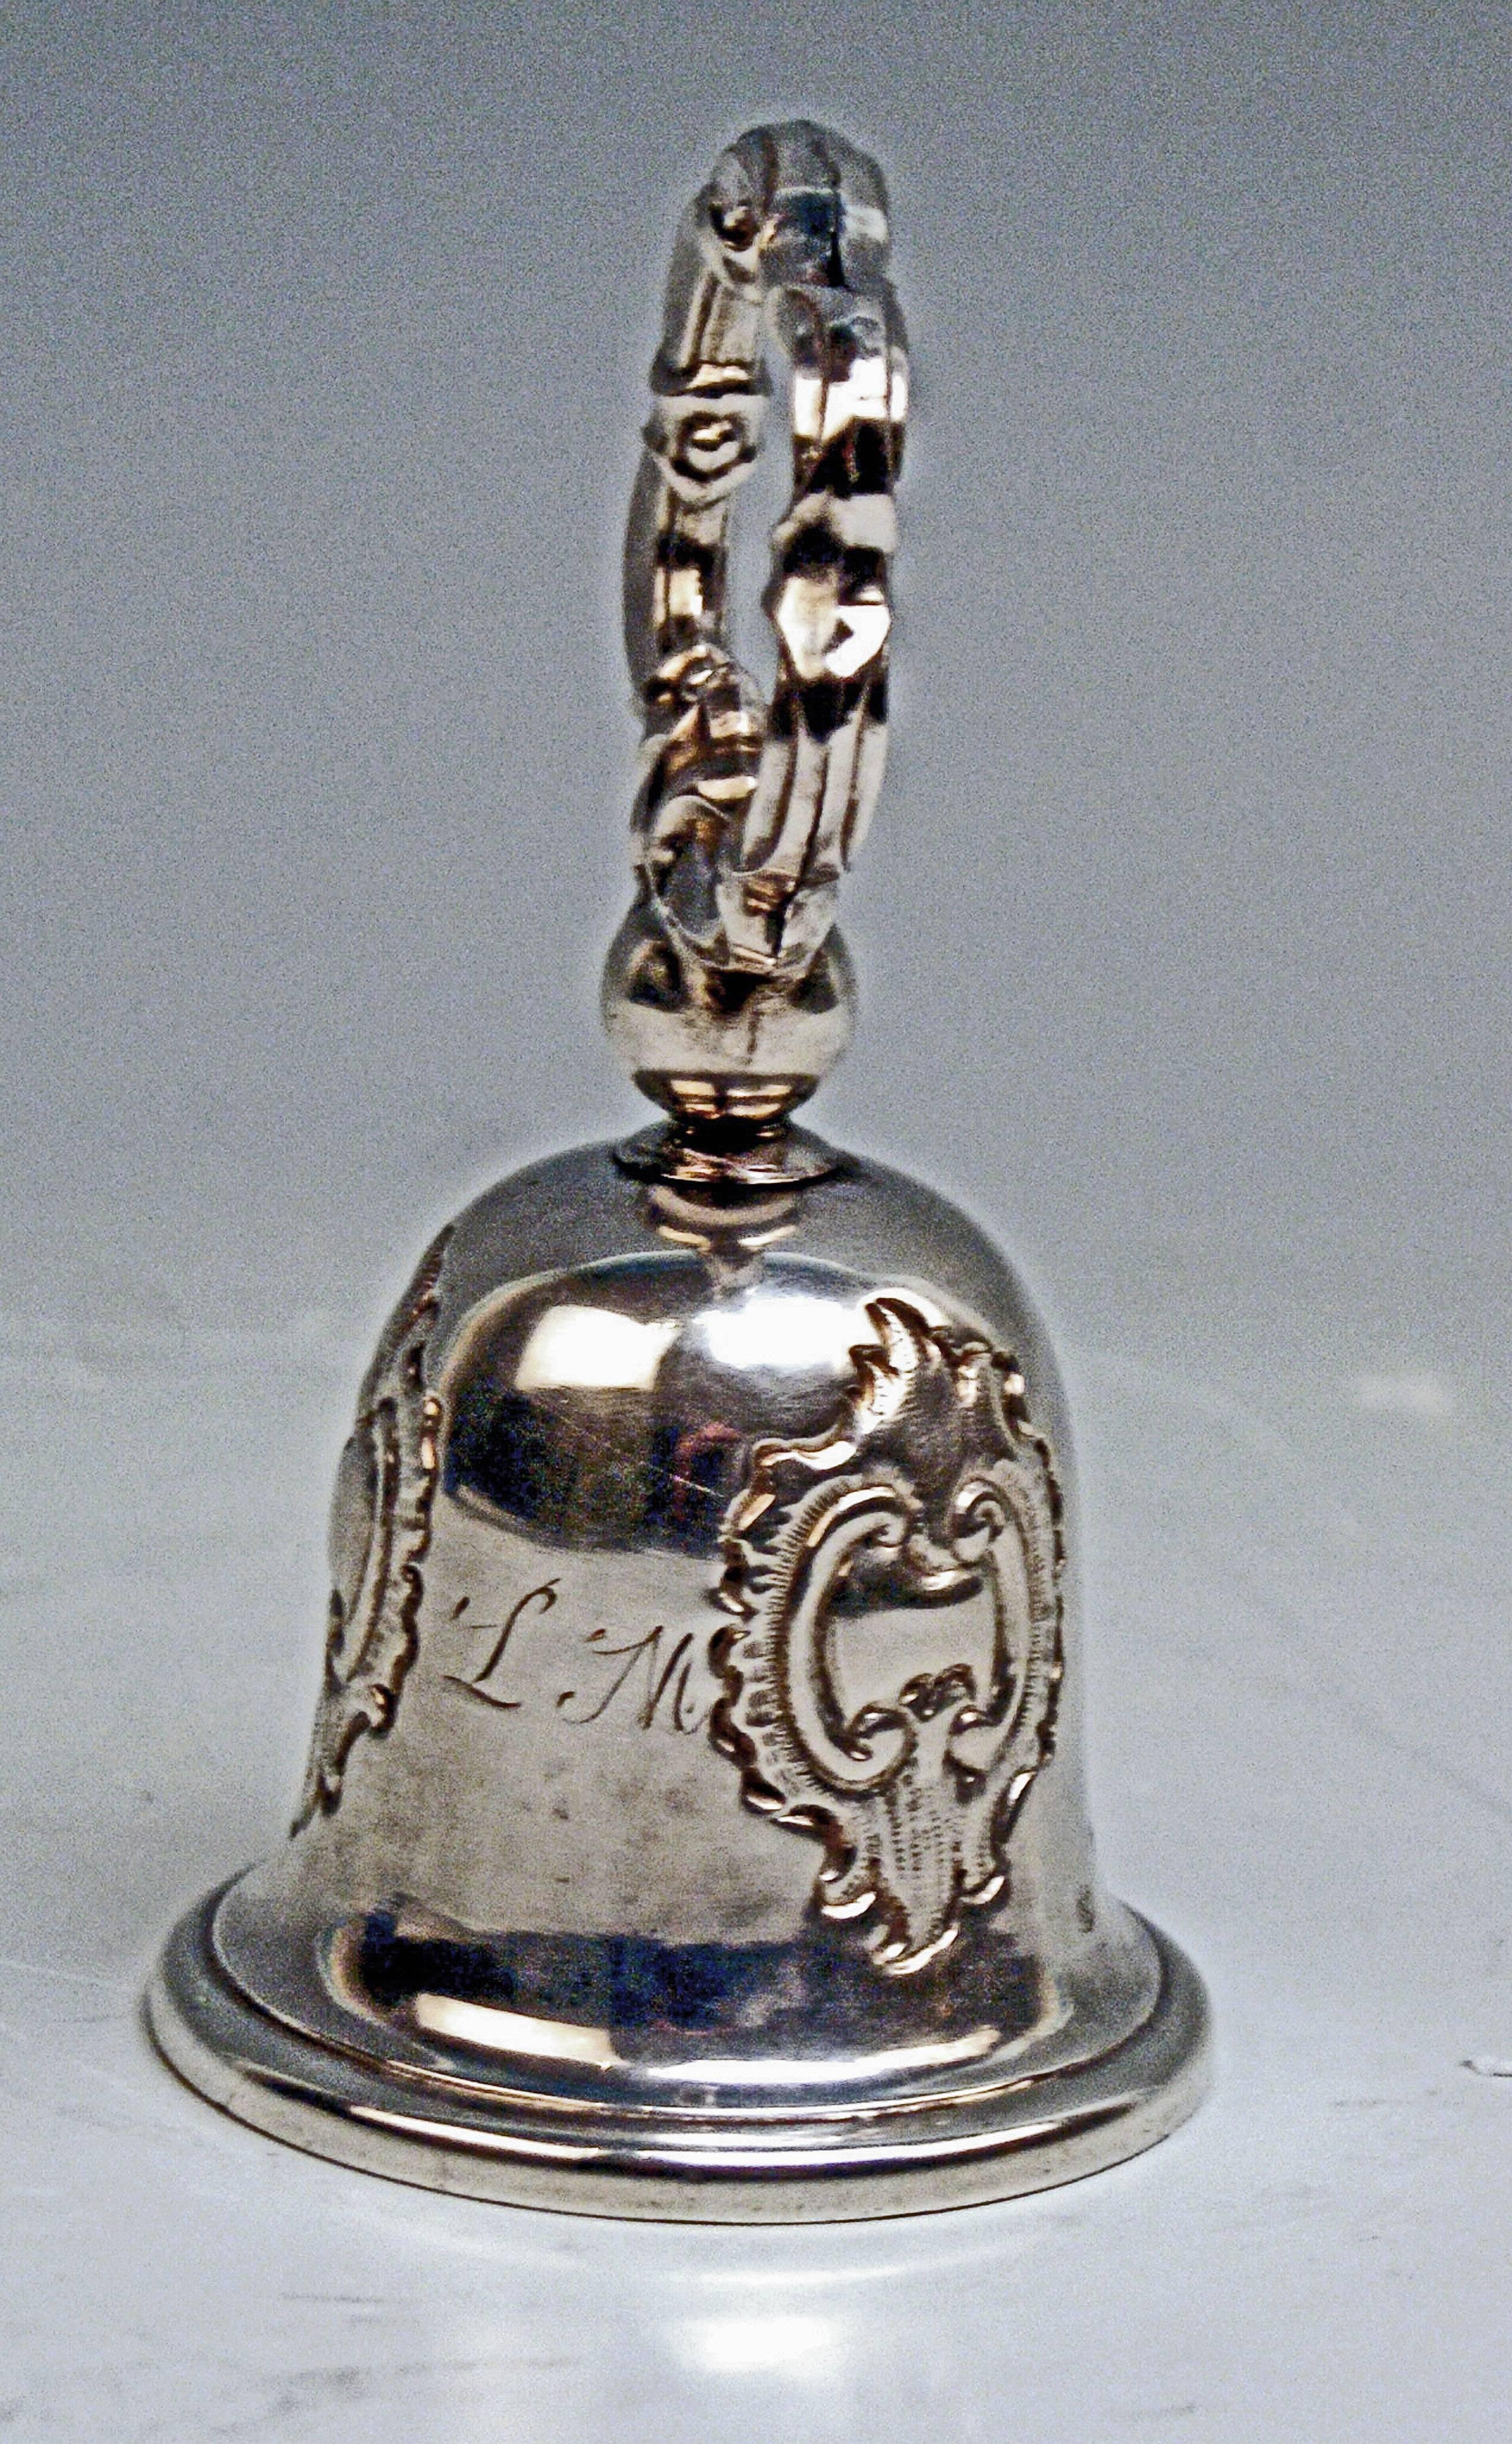 Nicest Biedermeier table bell
Hallmarked (VIENNESE SILVER)
manufactured circa 1836 

It is a table bell of finest manufacturing quality: Referring to style, it is made in High Viennese Biedermeier period of 1830-1840.
The table bell's surface